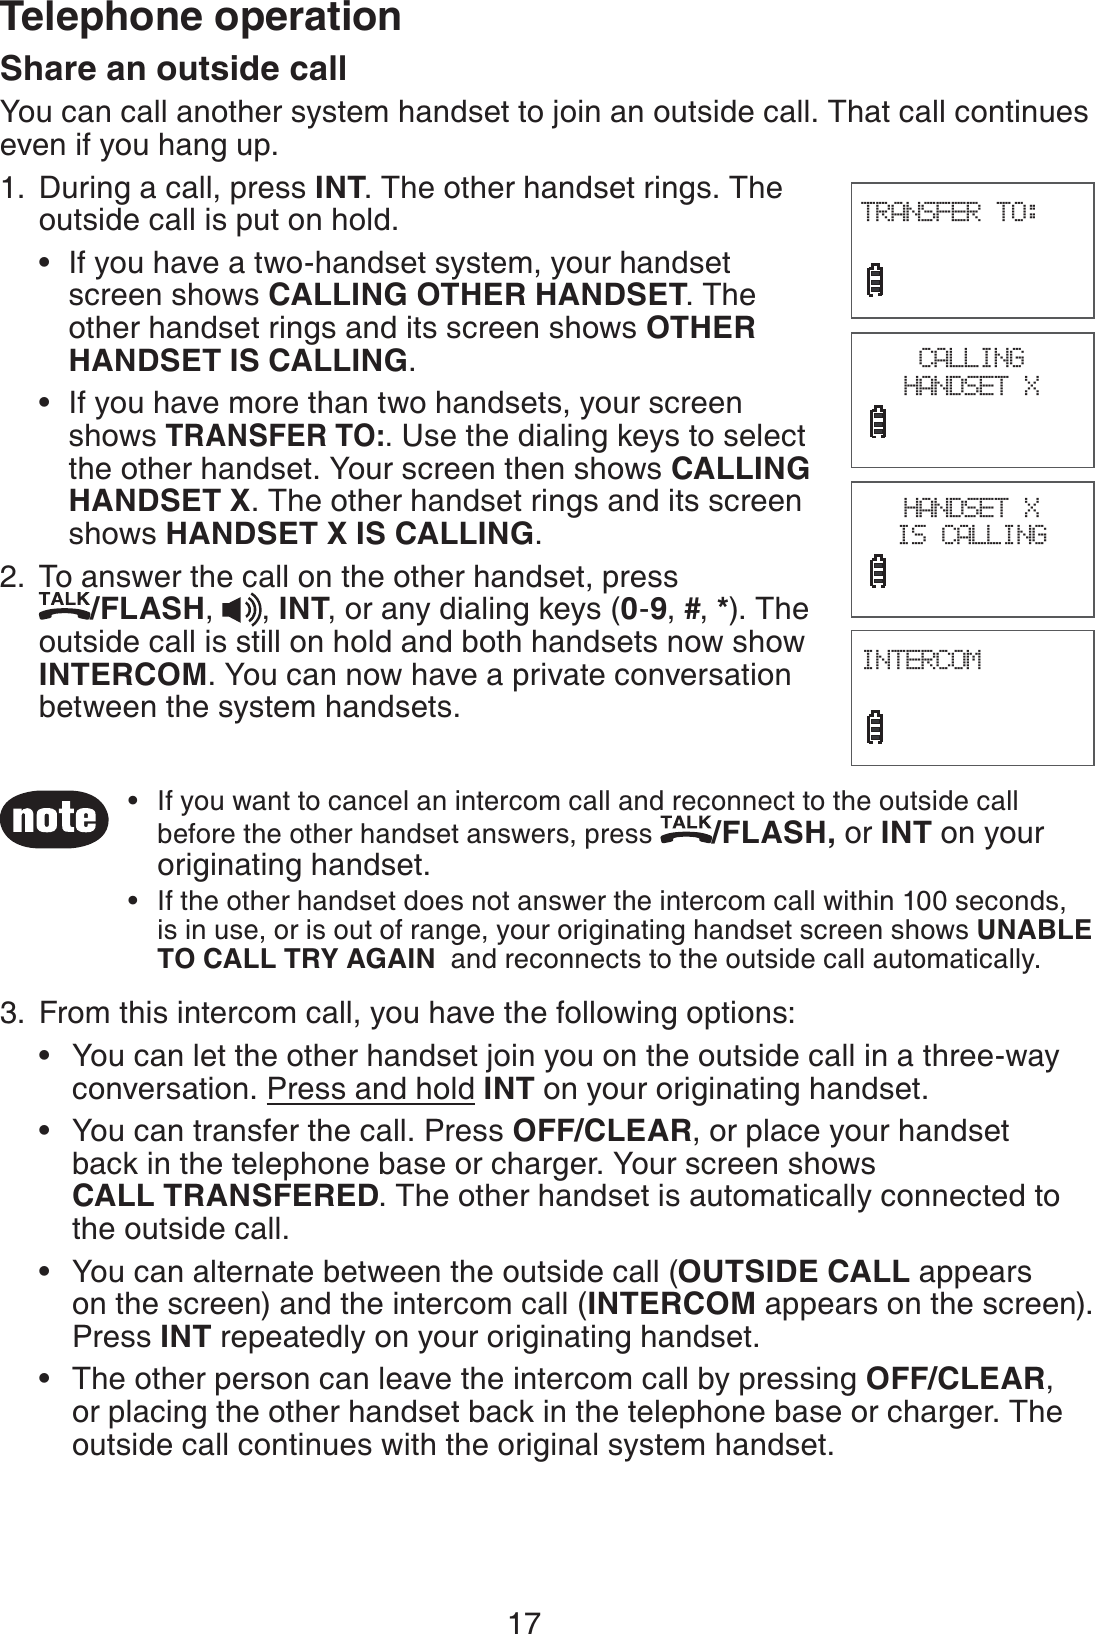 17Telephone operationShare an outside callYou can call another system handset to join an outside call. That call continues even if you hang up. During a call, press INT. The other handset rings. The outside call is put on hold.If you have a two-handset system, your handset    screen shows CALLING OTHER HANDSET. The    other handset rings and its screen shows OTHER    HANDSET IS CALLING.If you have more than two handsets, your screen   shows TRANSFER TO:. Use the dialing keys to select      the other handset. Your screen then shows CALLING     HANDSET X. The other handset rings and its screen     shows HANDSET X IS CALLING. To answer the call on the other handset, press    /FLASH,  , INT, or any dialing keys (0-9, #, *). The outside call is still on hold and both handsets now show INTERCOM. You can now have a private conversation between the system handsets.From this intercom call, you have the following options:You can let the other handset join you on the outside call in a three-way    conversation. Press and hold INT on your originating handset.You can transfer the call. Press OFF/CLEAR, or place your handset    back in the telephone base or charger. Your screen shows     CALL TRANSFERED. The other handset is automatically connected to    the outside call.You can alternate between the outside call (OUTSIDE CALL appears    on the screen) and the intercom call (INTERCOM appears on the screen).   Press INT repeatedly on your originating handset.The other person can leave the intercom call by pressing OFF/CLEAR,    or placing the other handset back in the telephone base or charger. The    outside call continues with the original system handset.1.••2.3.••••CALLING HANDSET XINTERCOM                             TRANSFER TO:                             HANDSET X IS CALLINGIf you want to cancel an intercom call and reconnect to the outside call before the other handset answers, press /FLASH, or INT on your originating handset.If the other handset does not answer the intercom call within 100 seconds, is in use, or is out of range, your originating handset screen shows UNABLE TO CALL TRY AGAIN  and reconnects to the outside call automatically.••